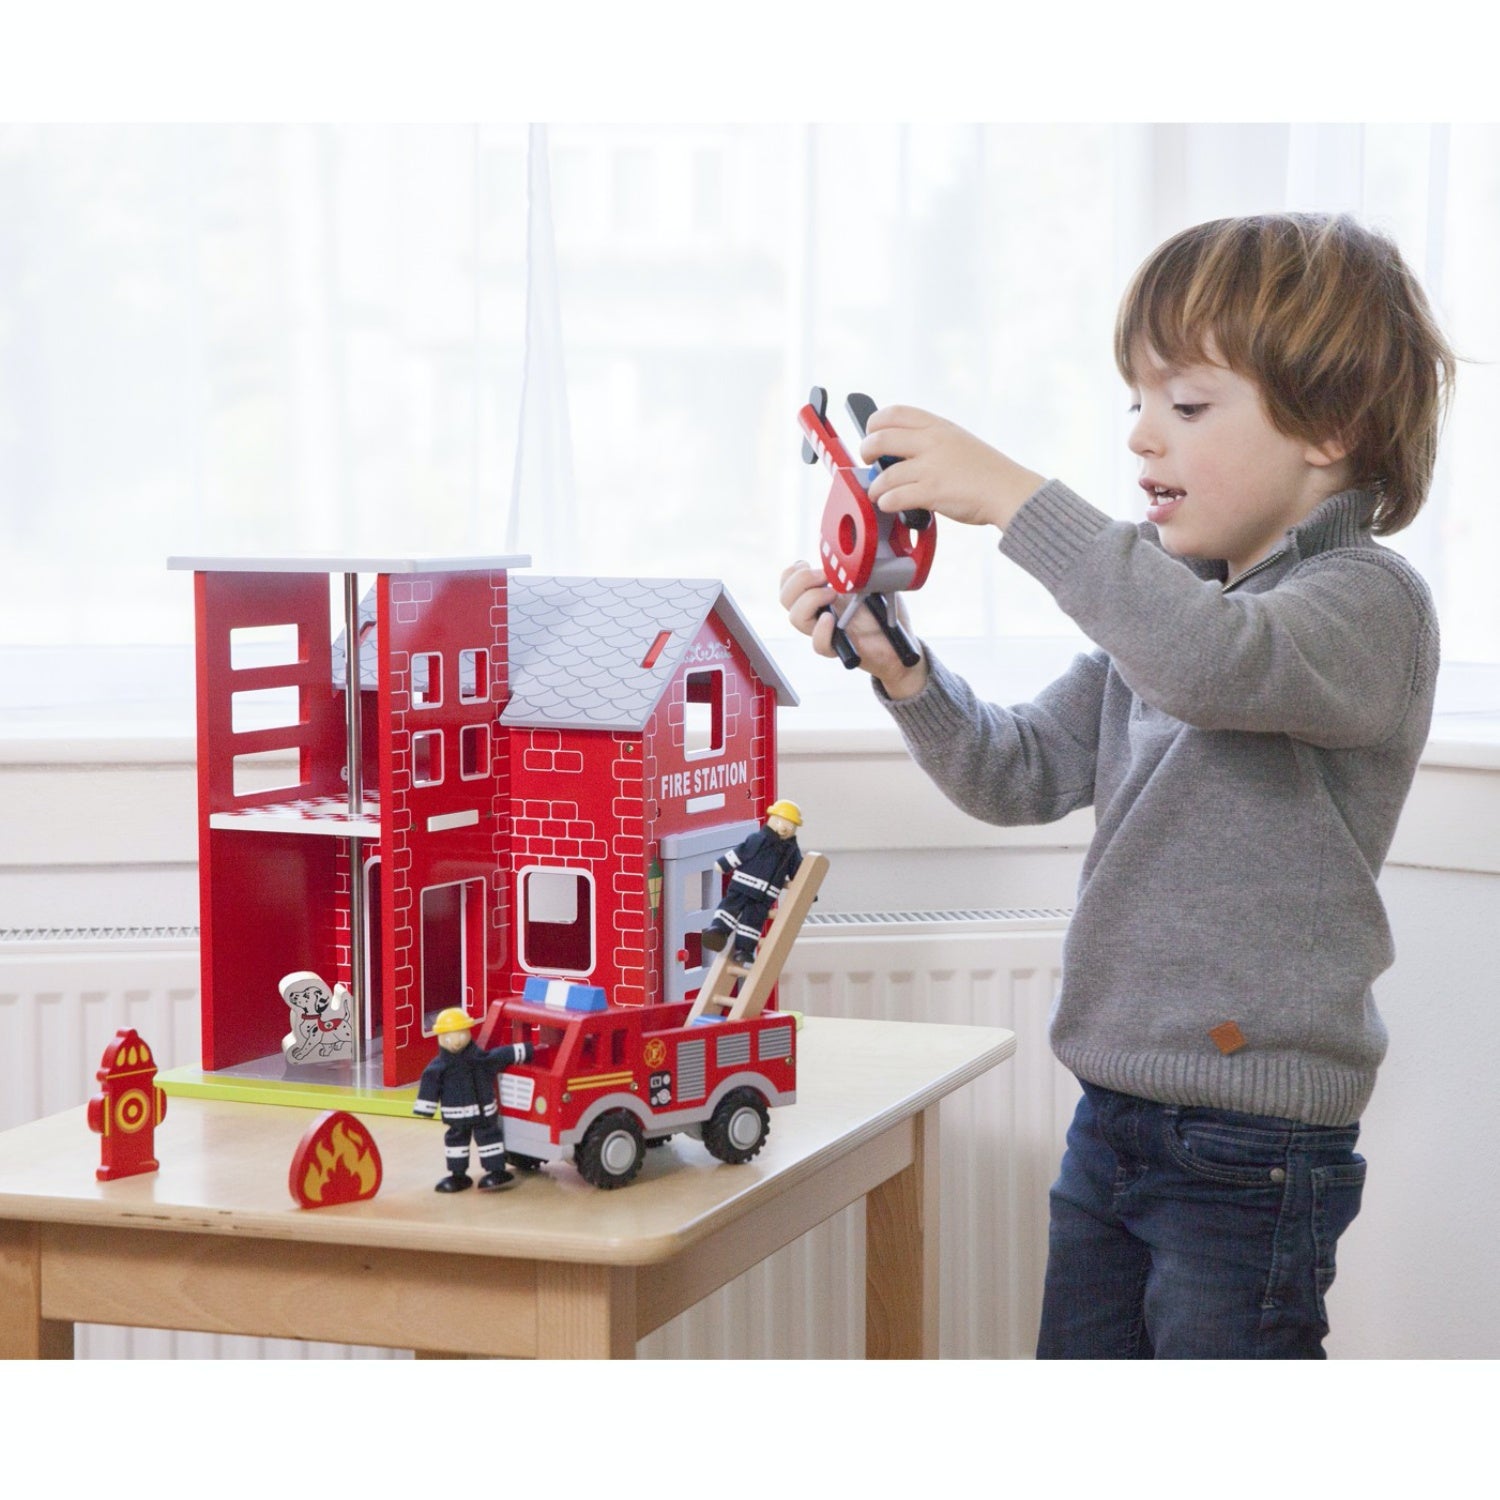 New Classic Wooden Toy Fire Station Play Set | Imaginative Play Toys | Lifestyle – Boy Playing with Wooden Figure | BeoVERDE.ie